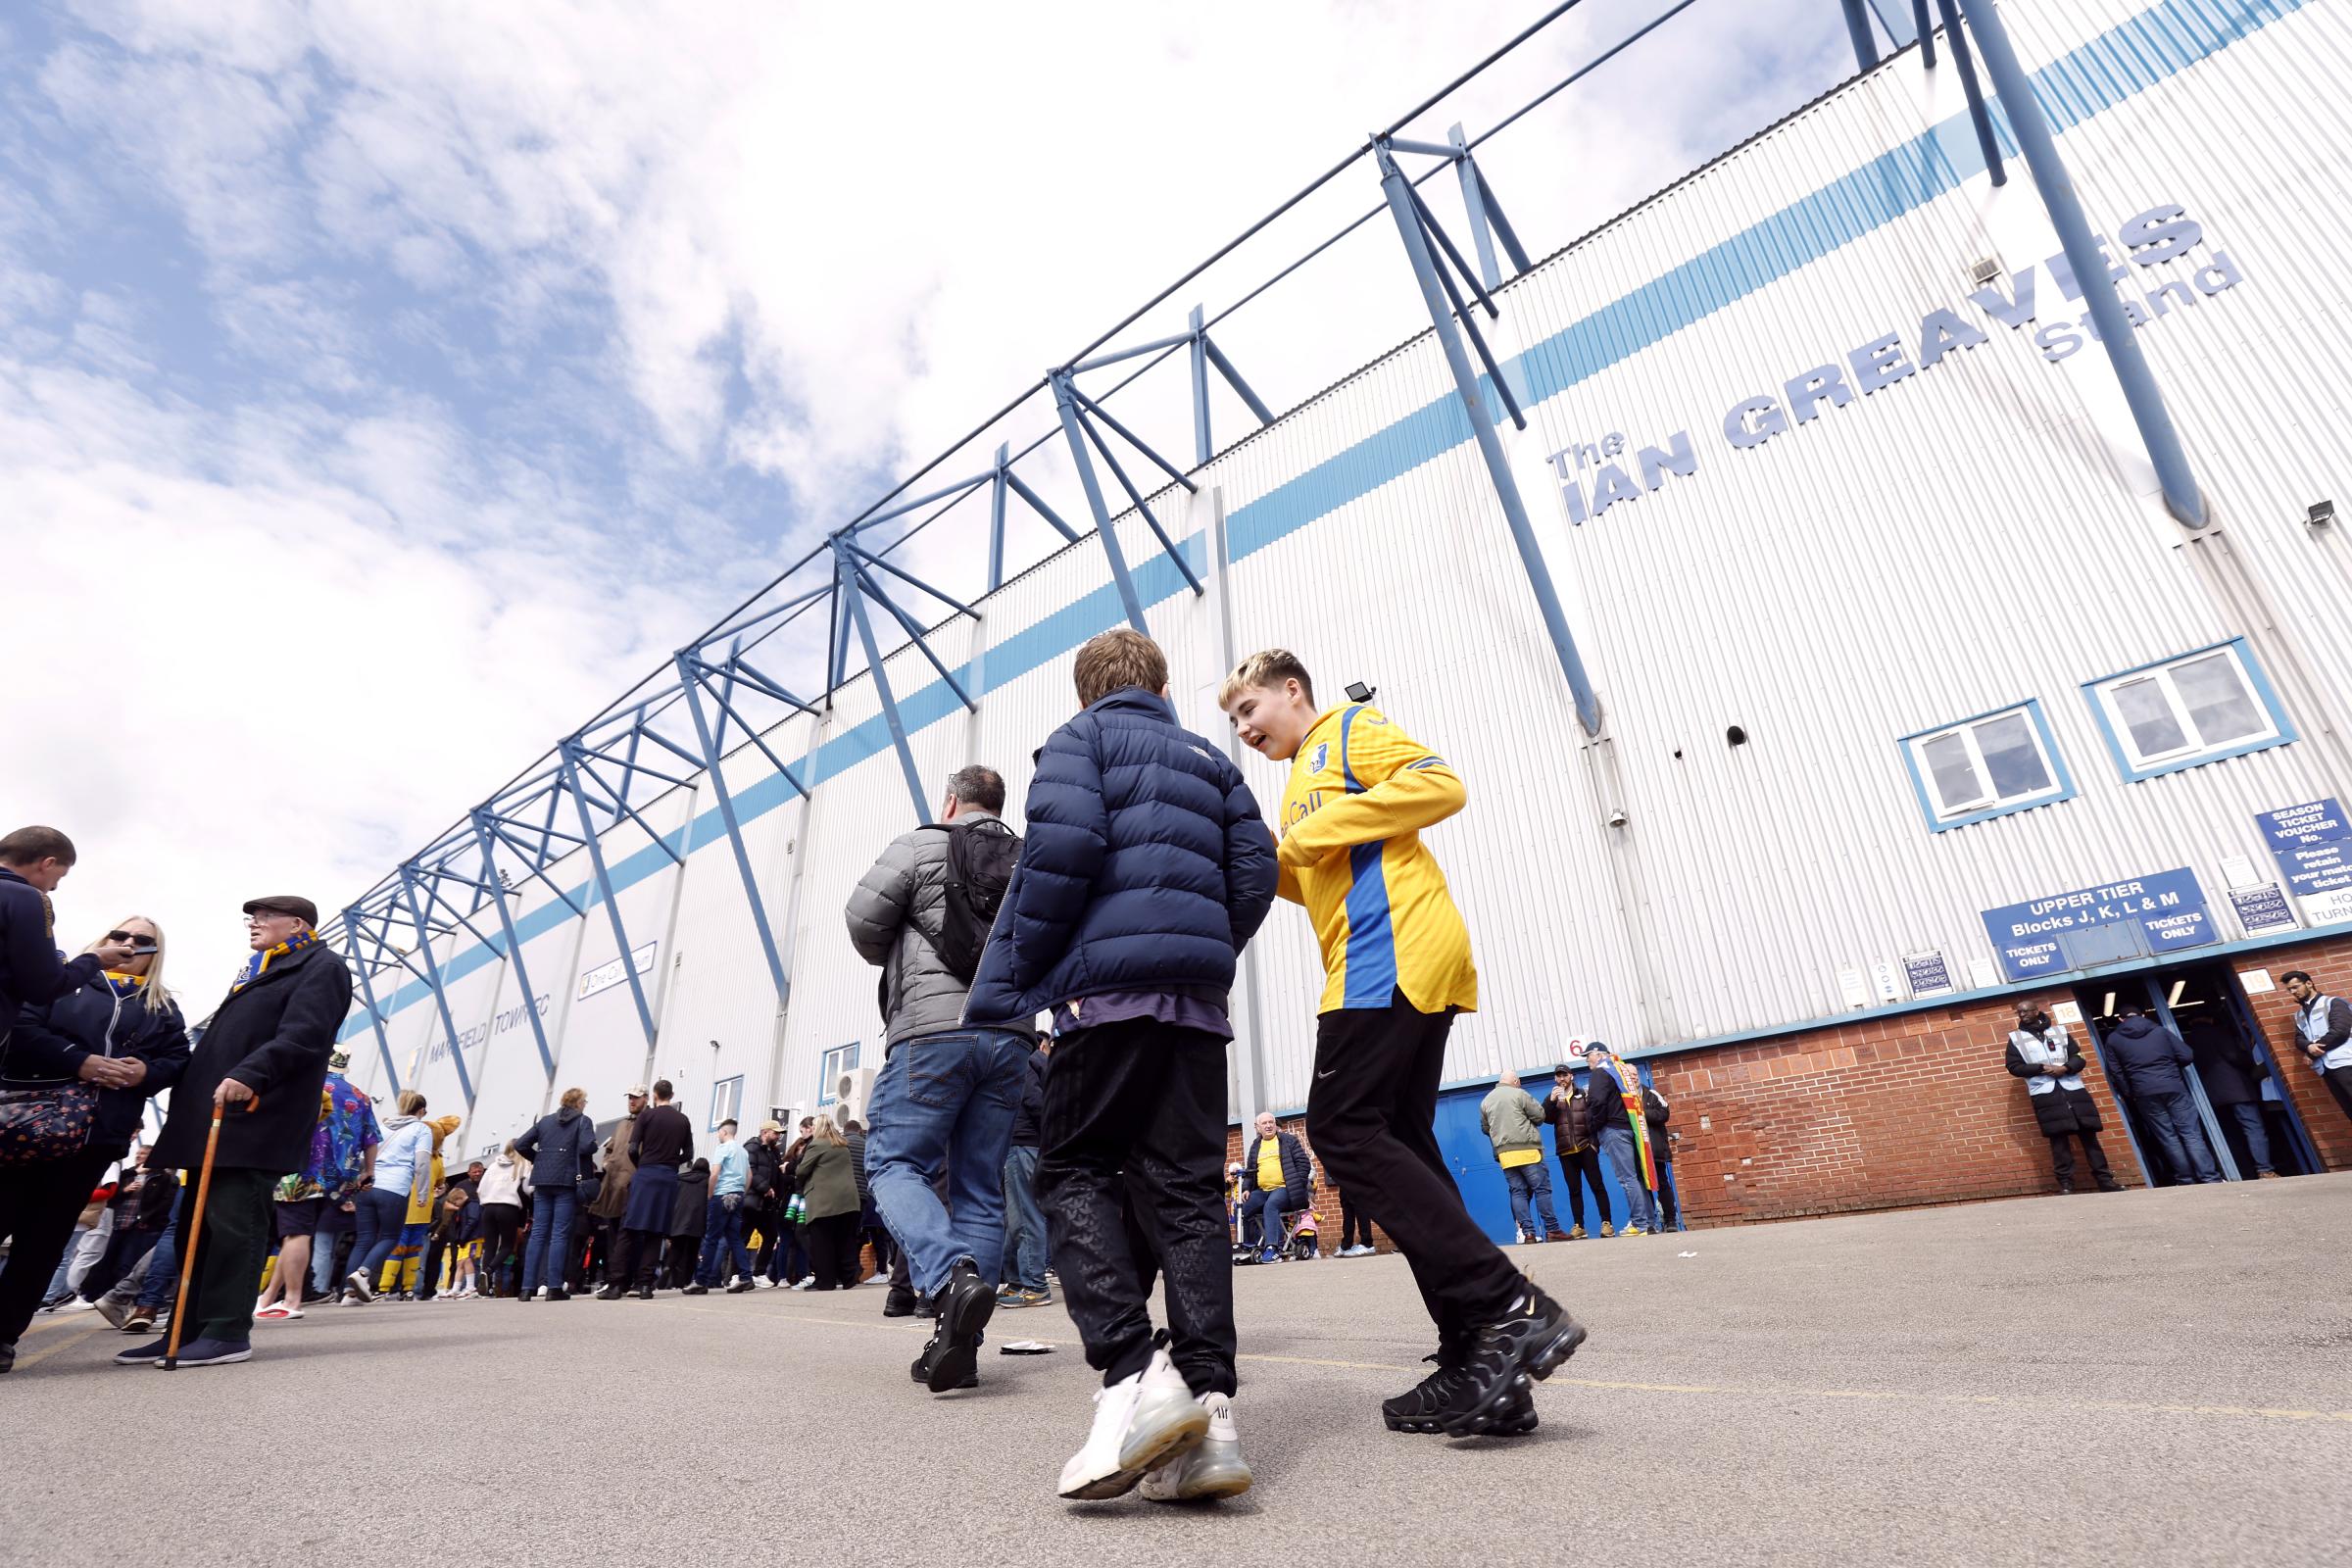 Oxford United to visit Mansfield Town in pre-season friendly